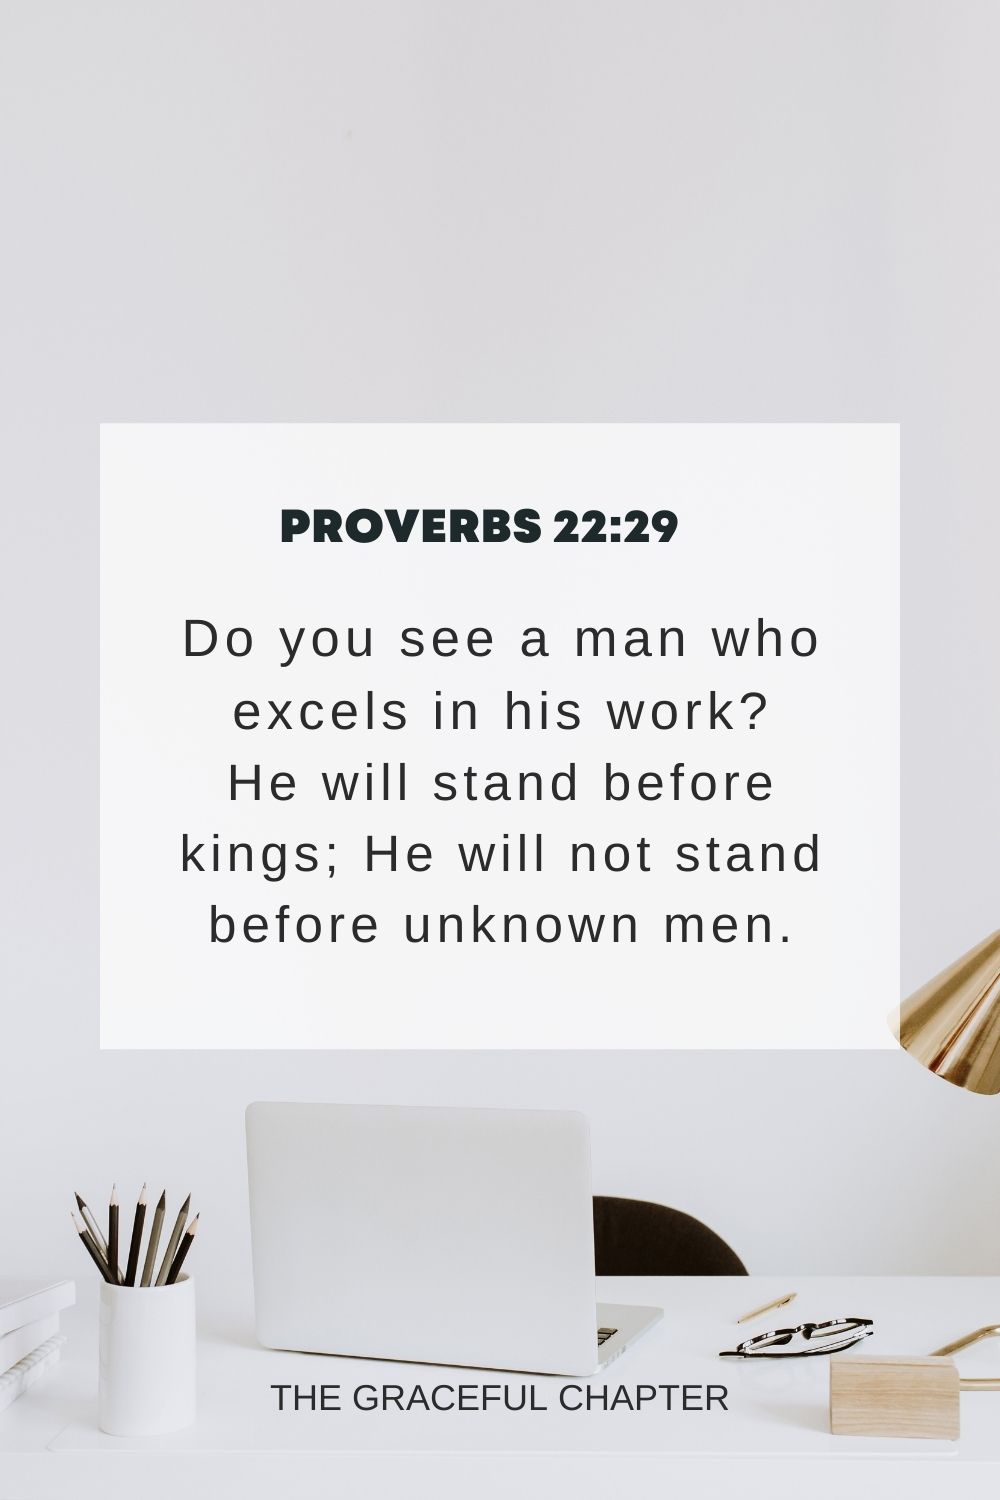 Do you see a man who excels in his work? He will stand before kings; He will not stand before unknown men. Proverbs 22:29